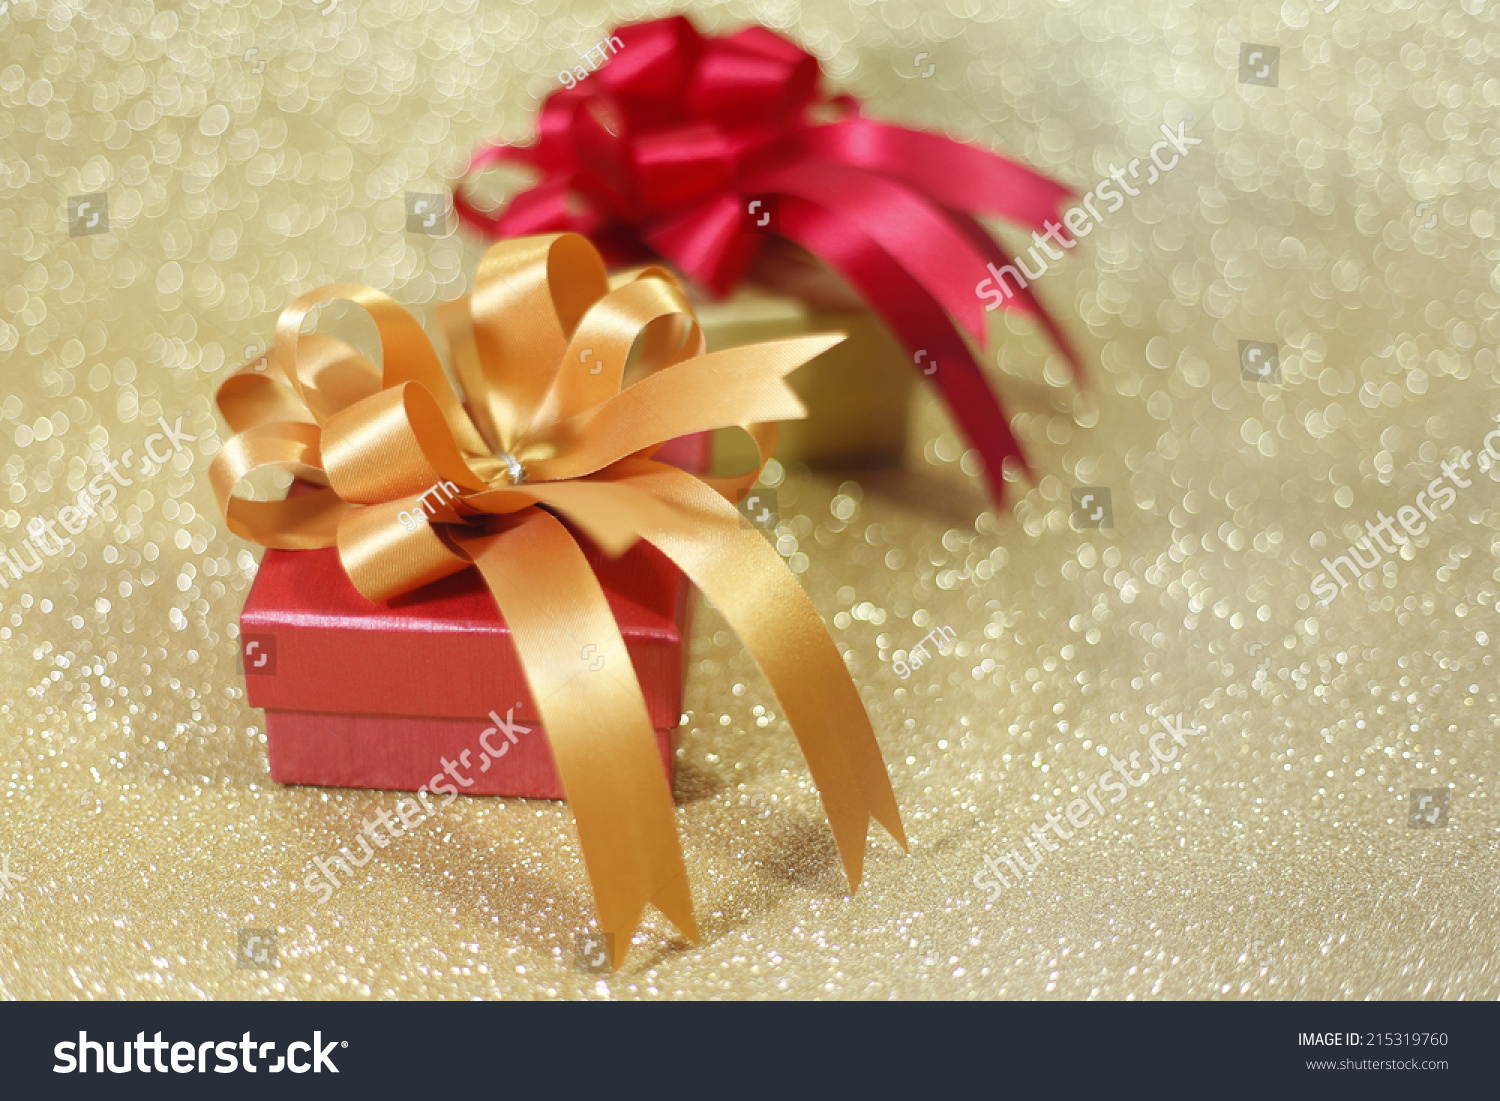 Christmas gift on Decorative background in gold.; #215319760